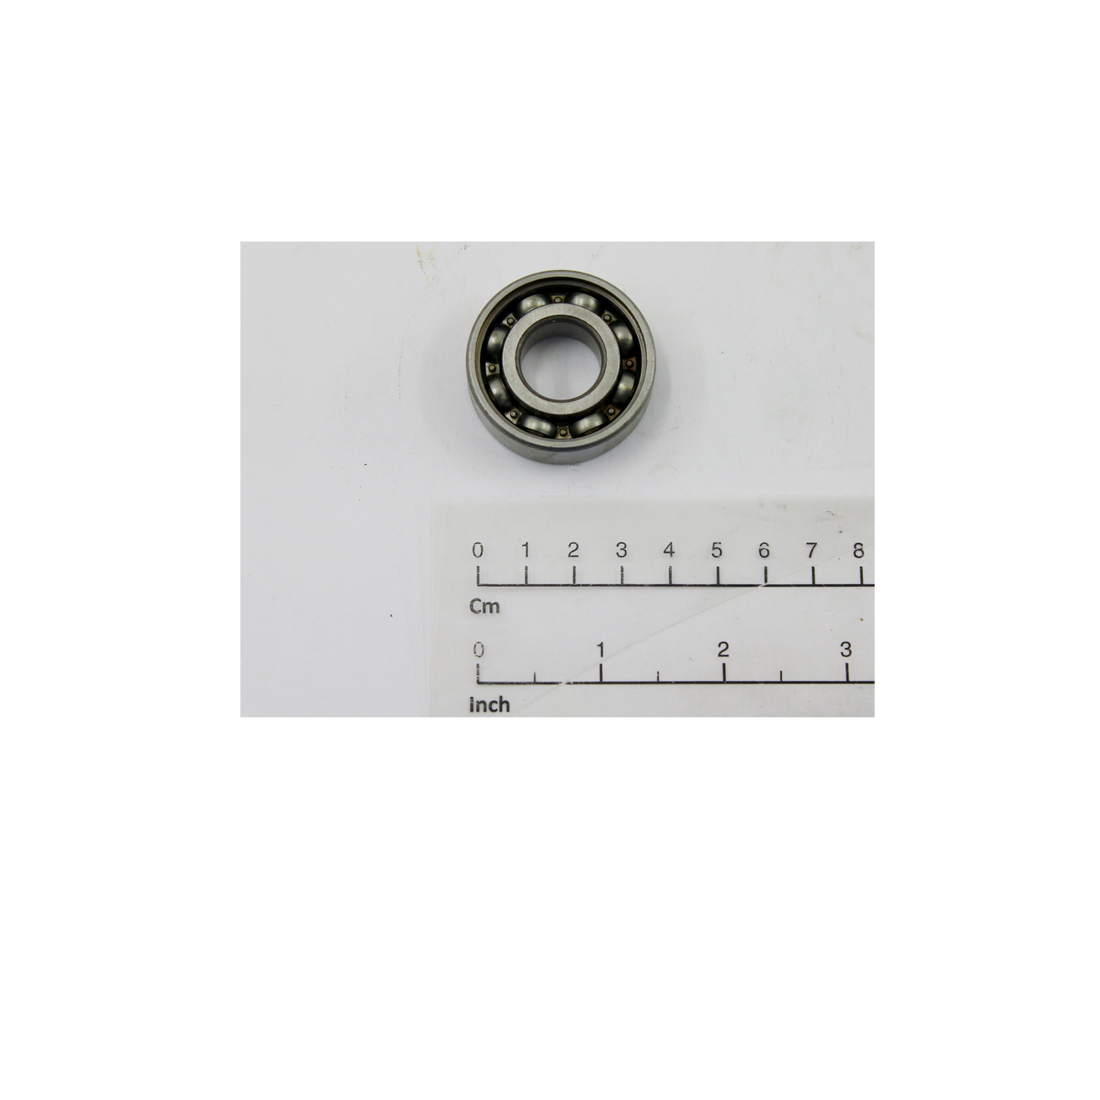 R&M Parts - Deep Groove Ball Bearing, Part Number: 52296109